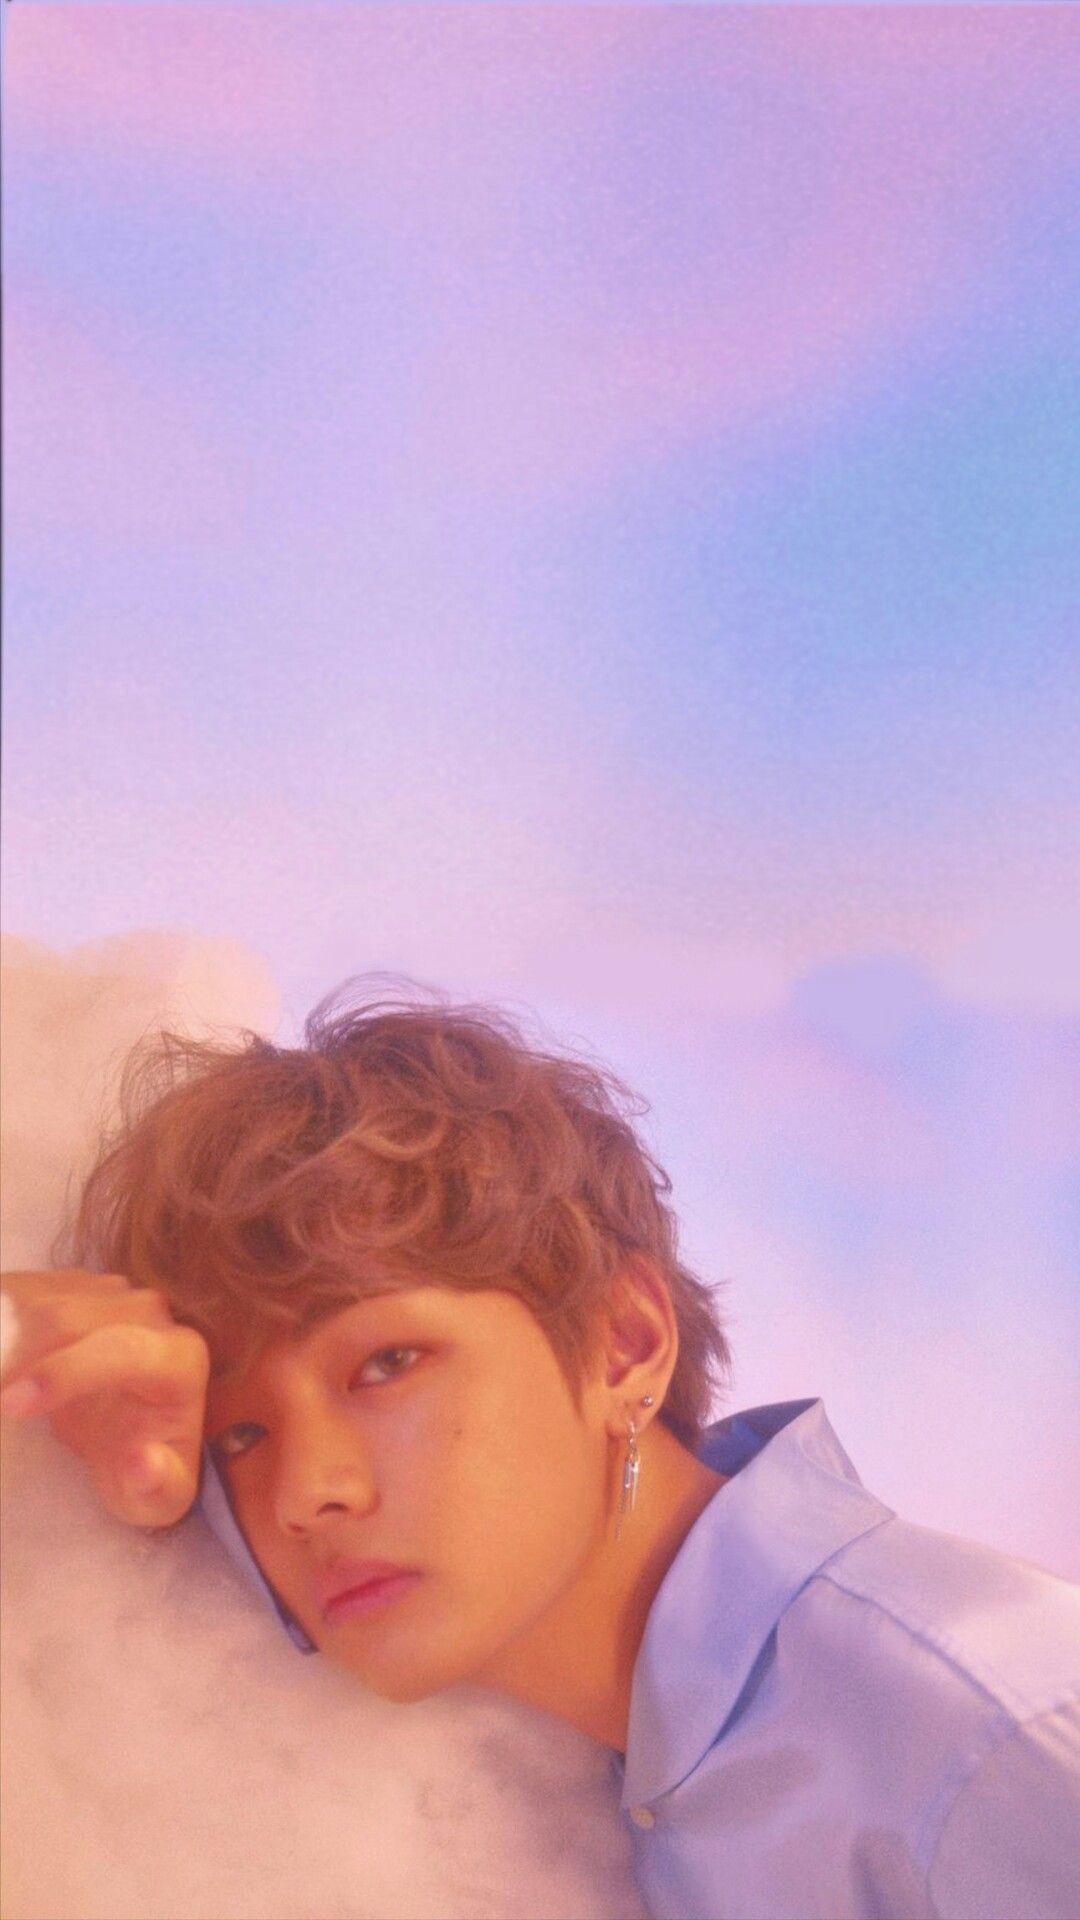 Bts Wallpaper Pleat Aesthetic Wallpapers Kim Taehyung Olds Video Hot Sex Picture